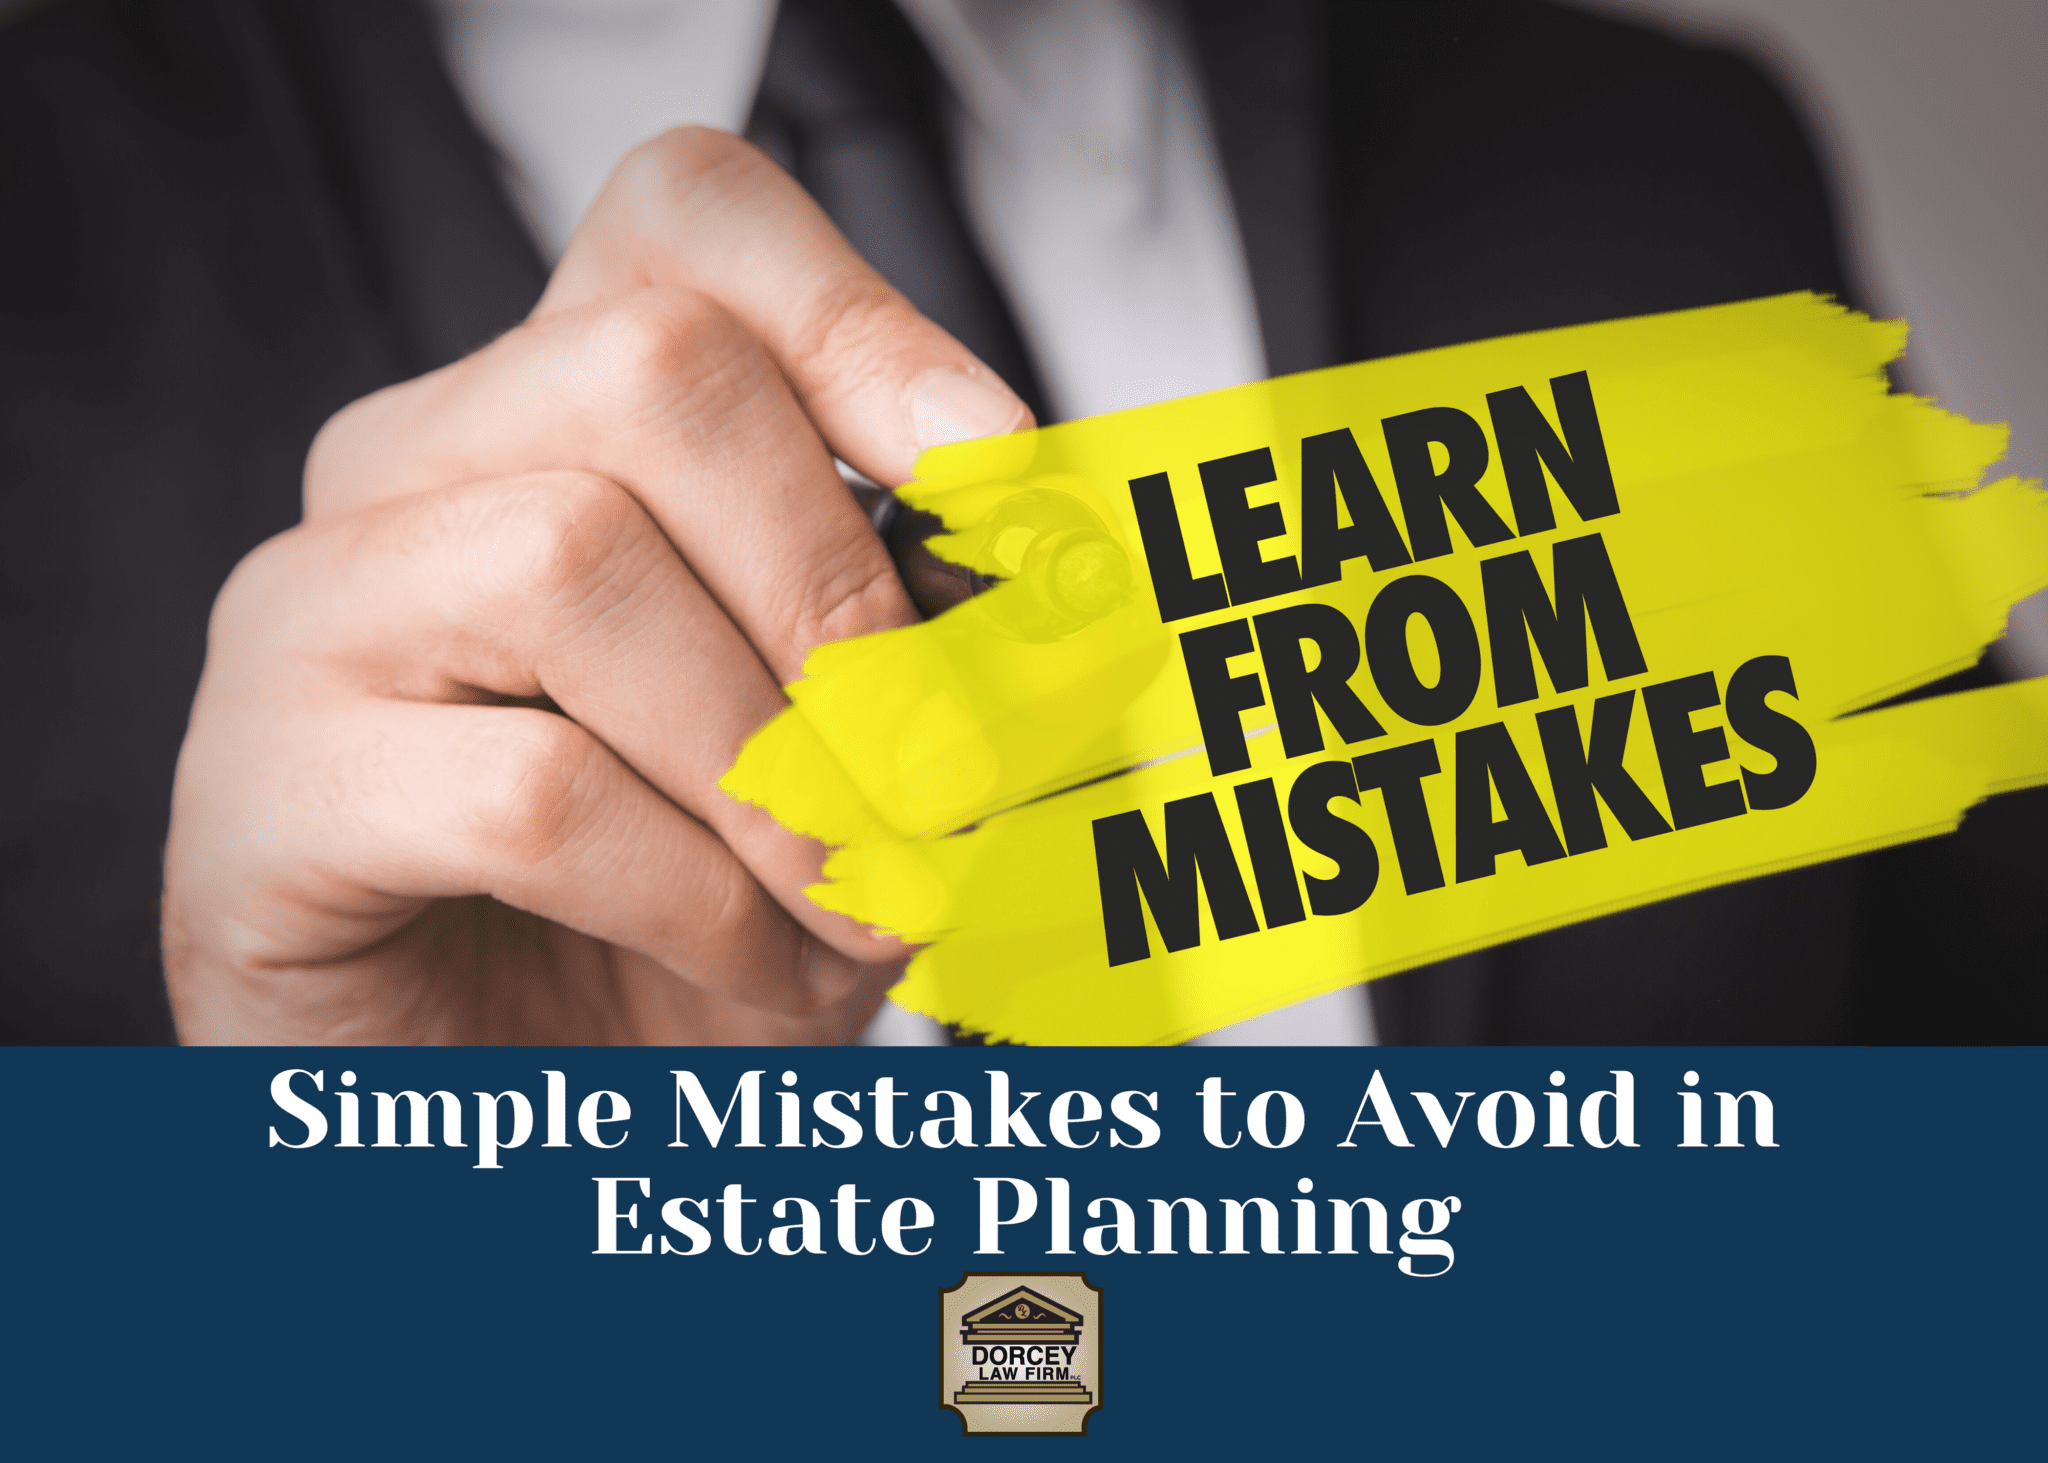 Simple Mistakes to Avoid in Estate Planning